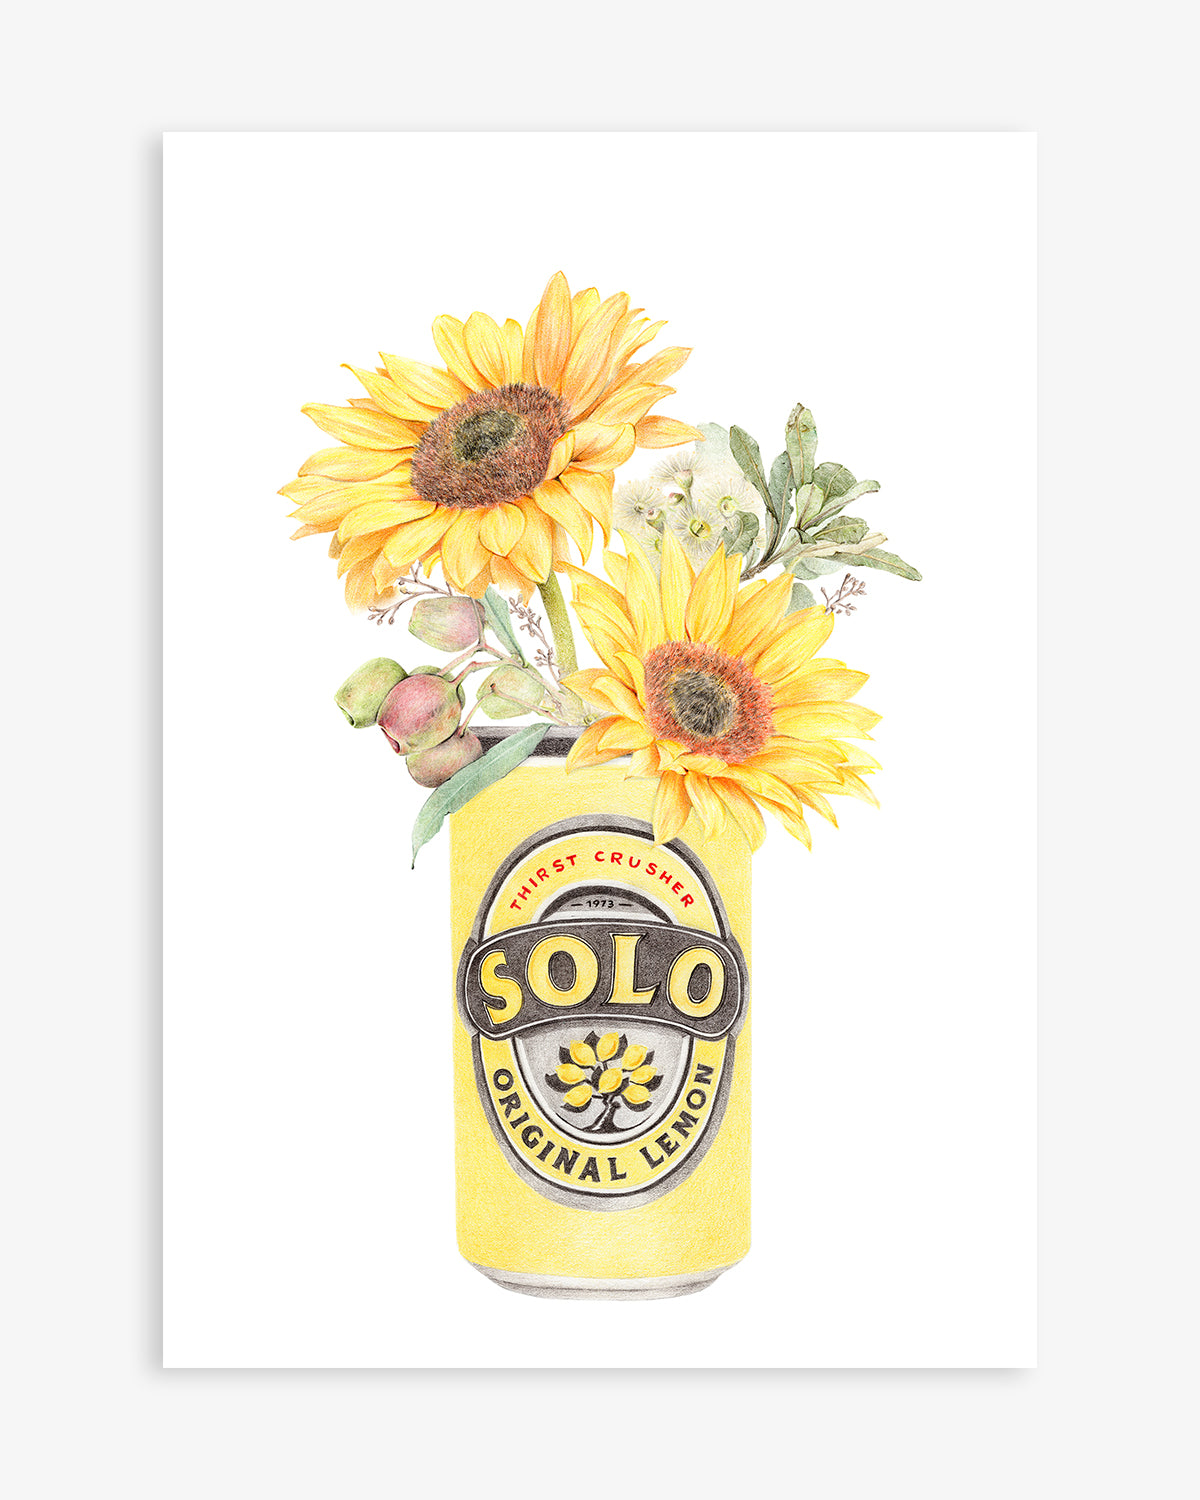 Australian botanical print featuring a Solo can with sunflowers and native flowers